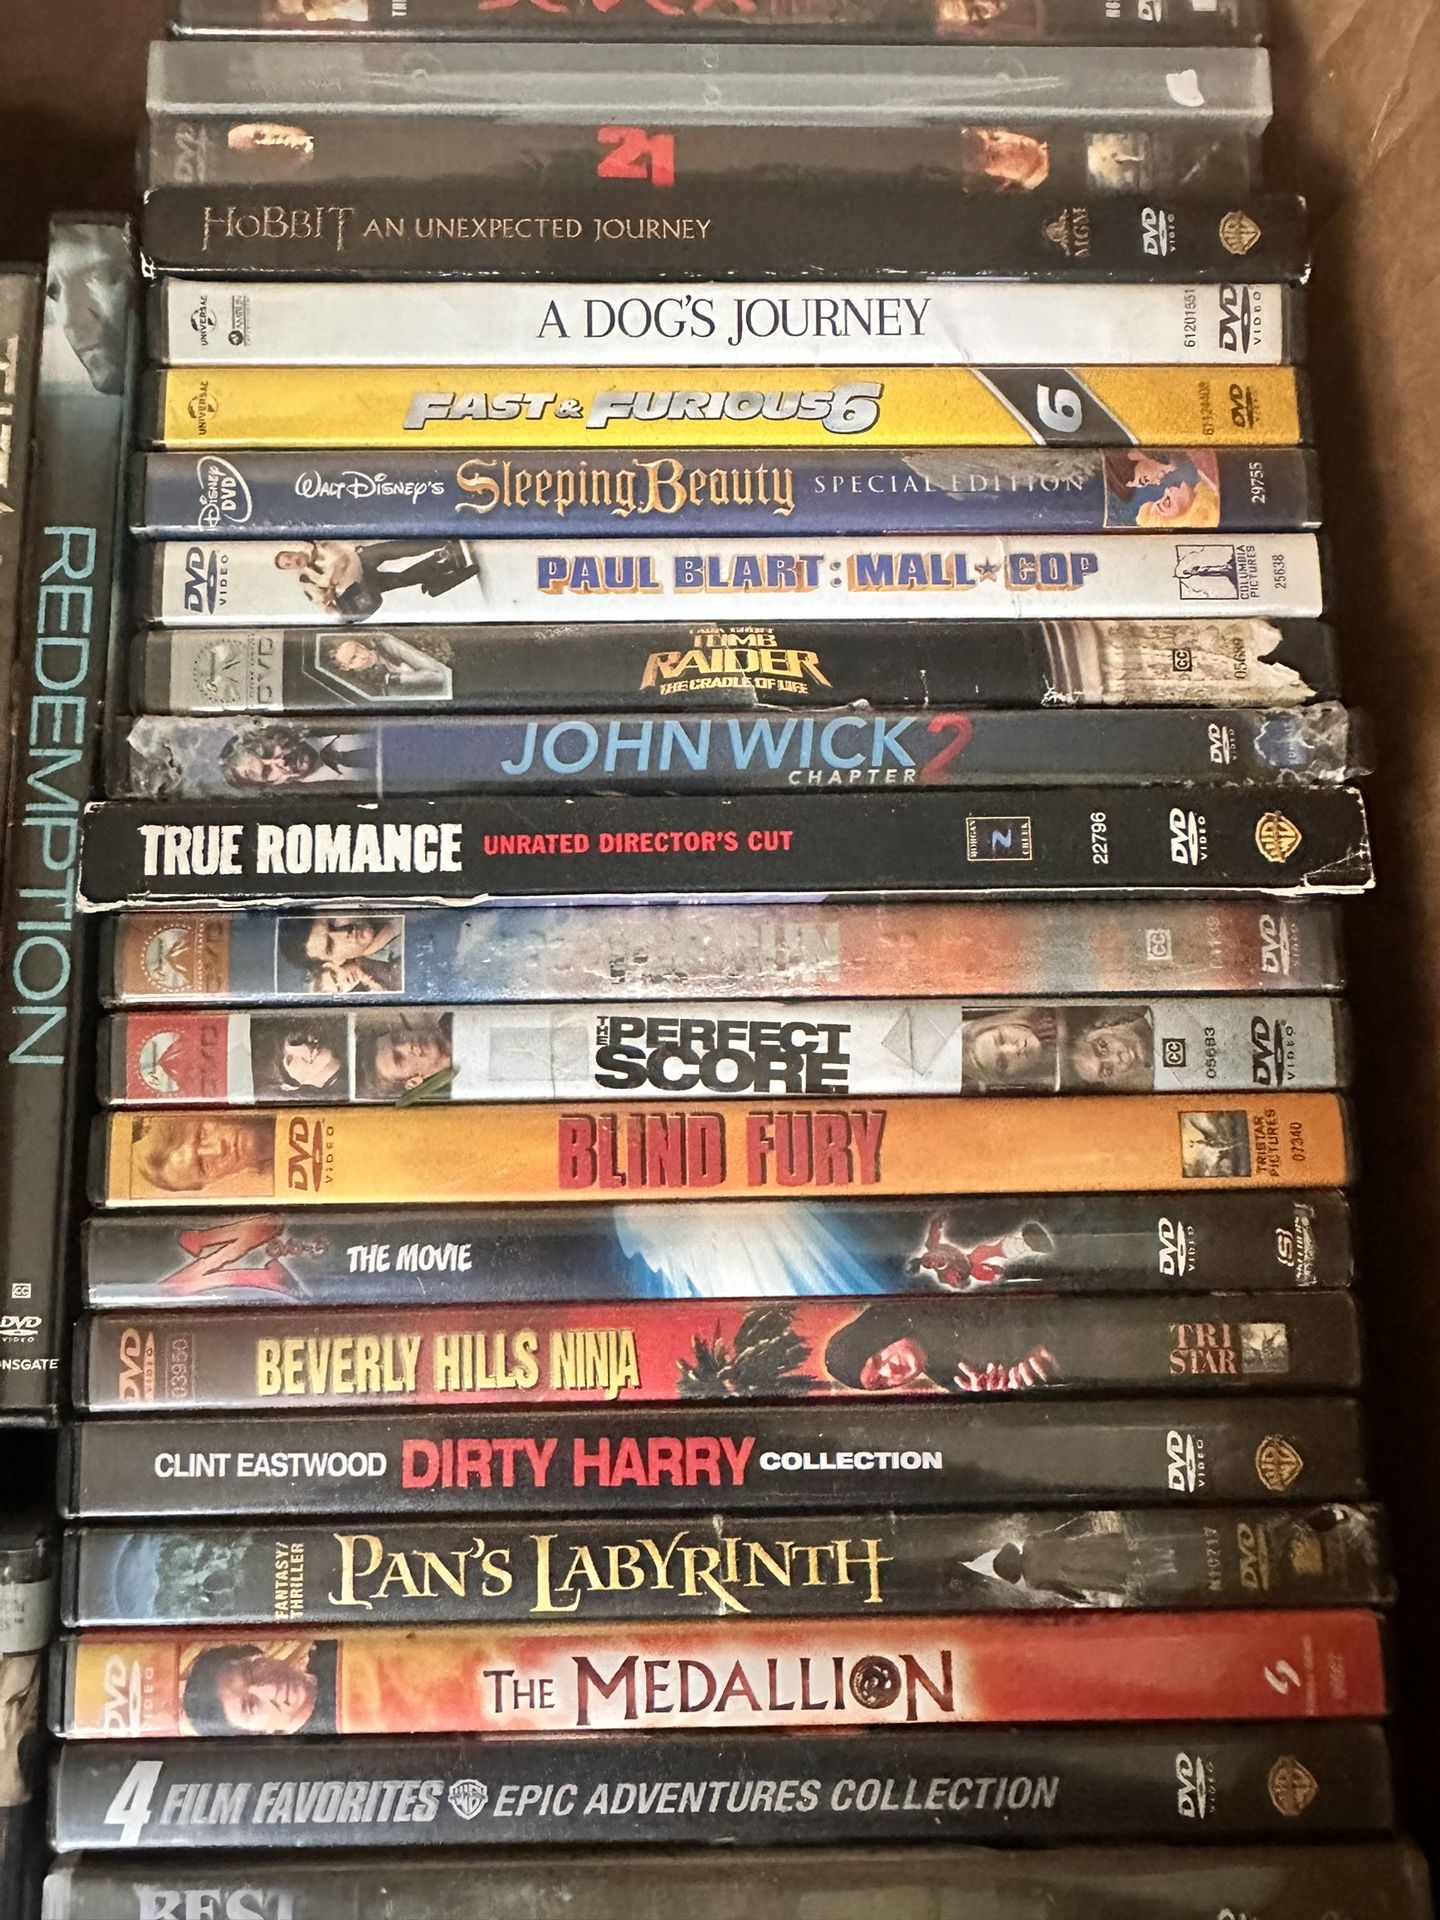 DVD MOVIES - More Than 500 Titles!